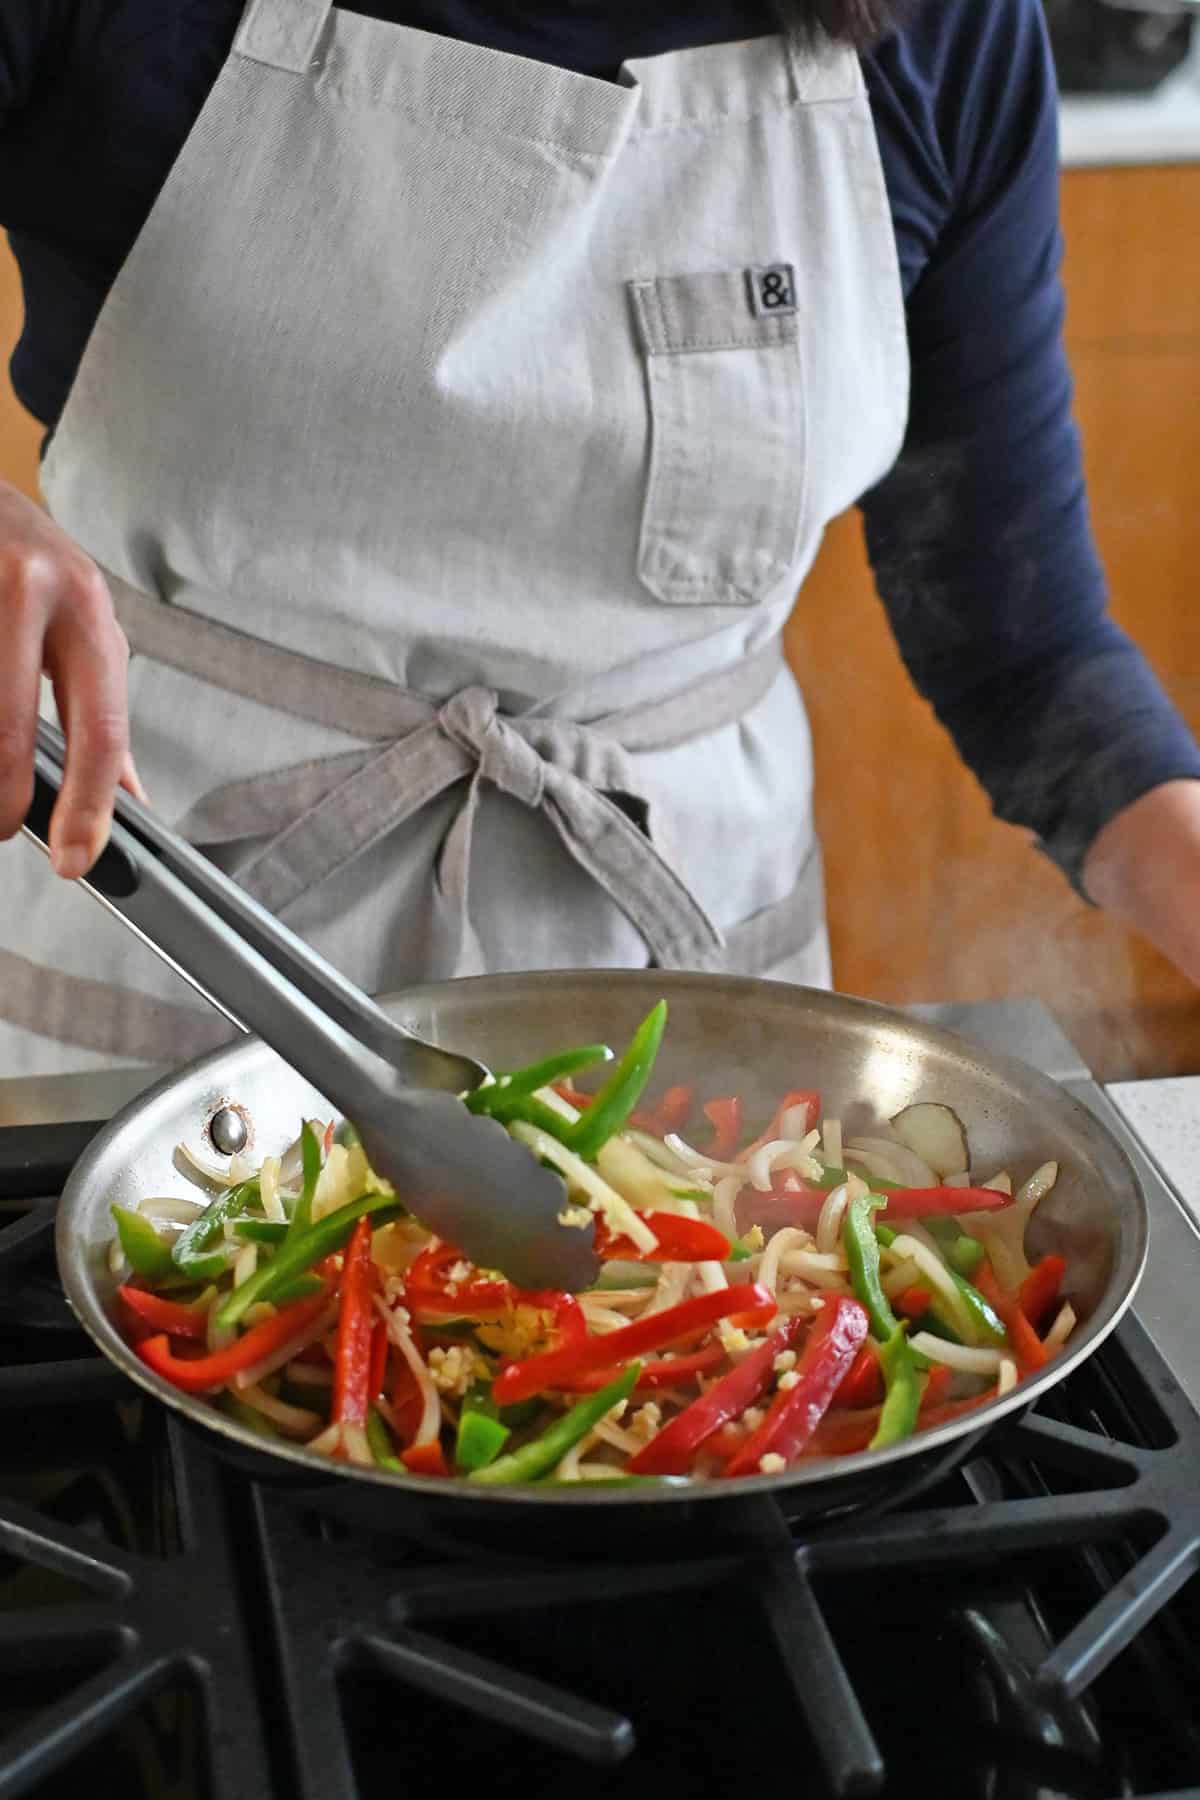 A pair of tongs is tossing sliced onions and belle peppers in a stainless steel skillet.